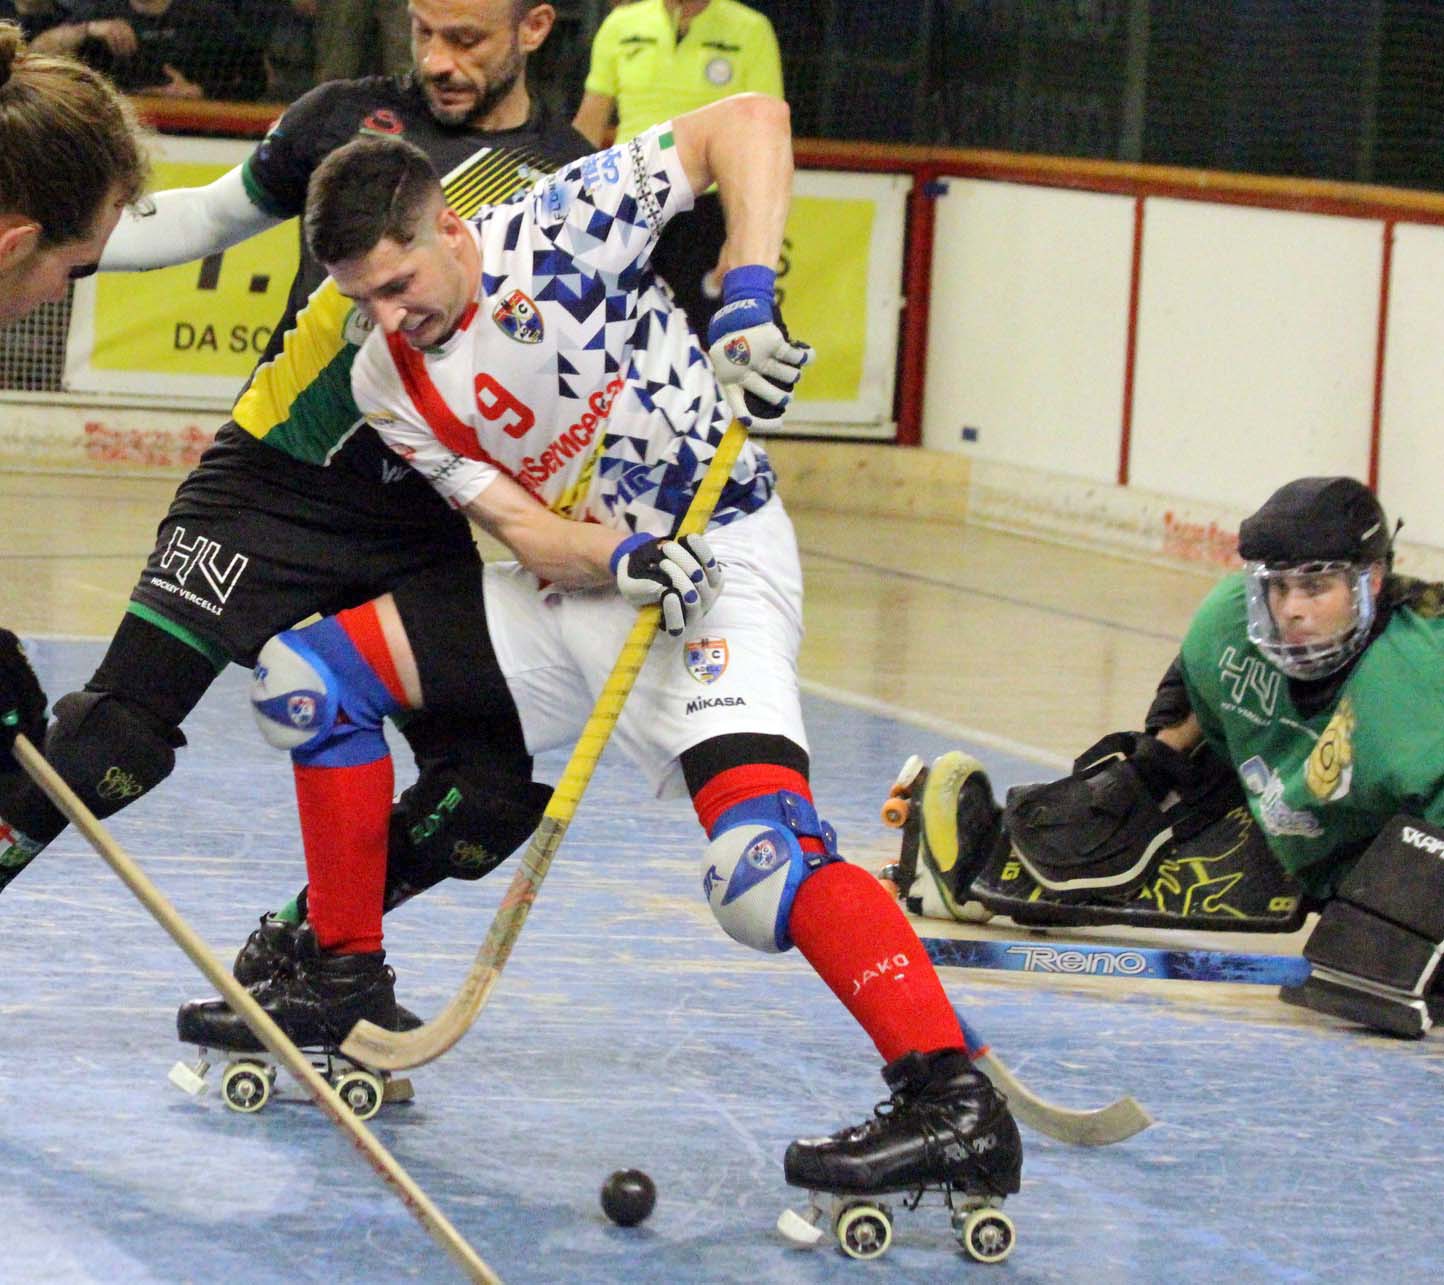 One of the classics of rink hockey, Monza-Vercelli, concludes the first day’s programme